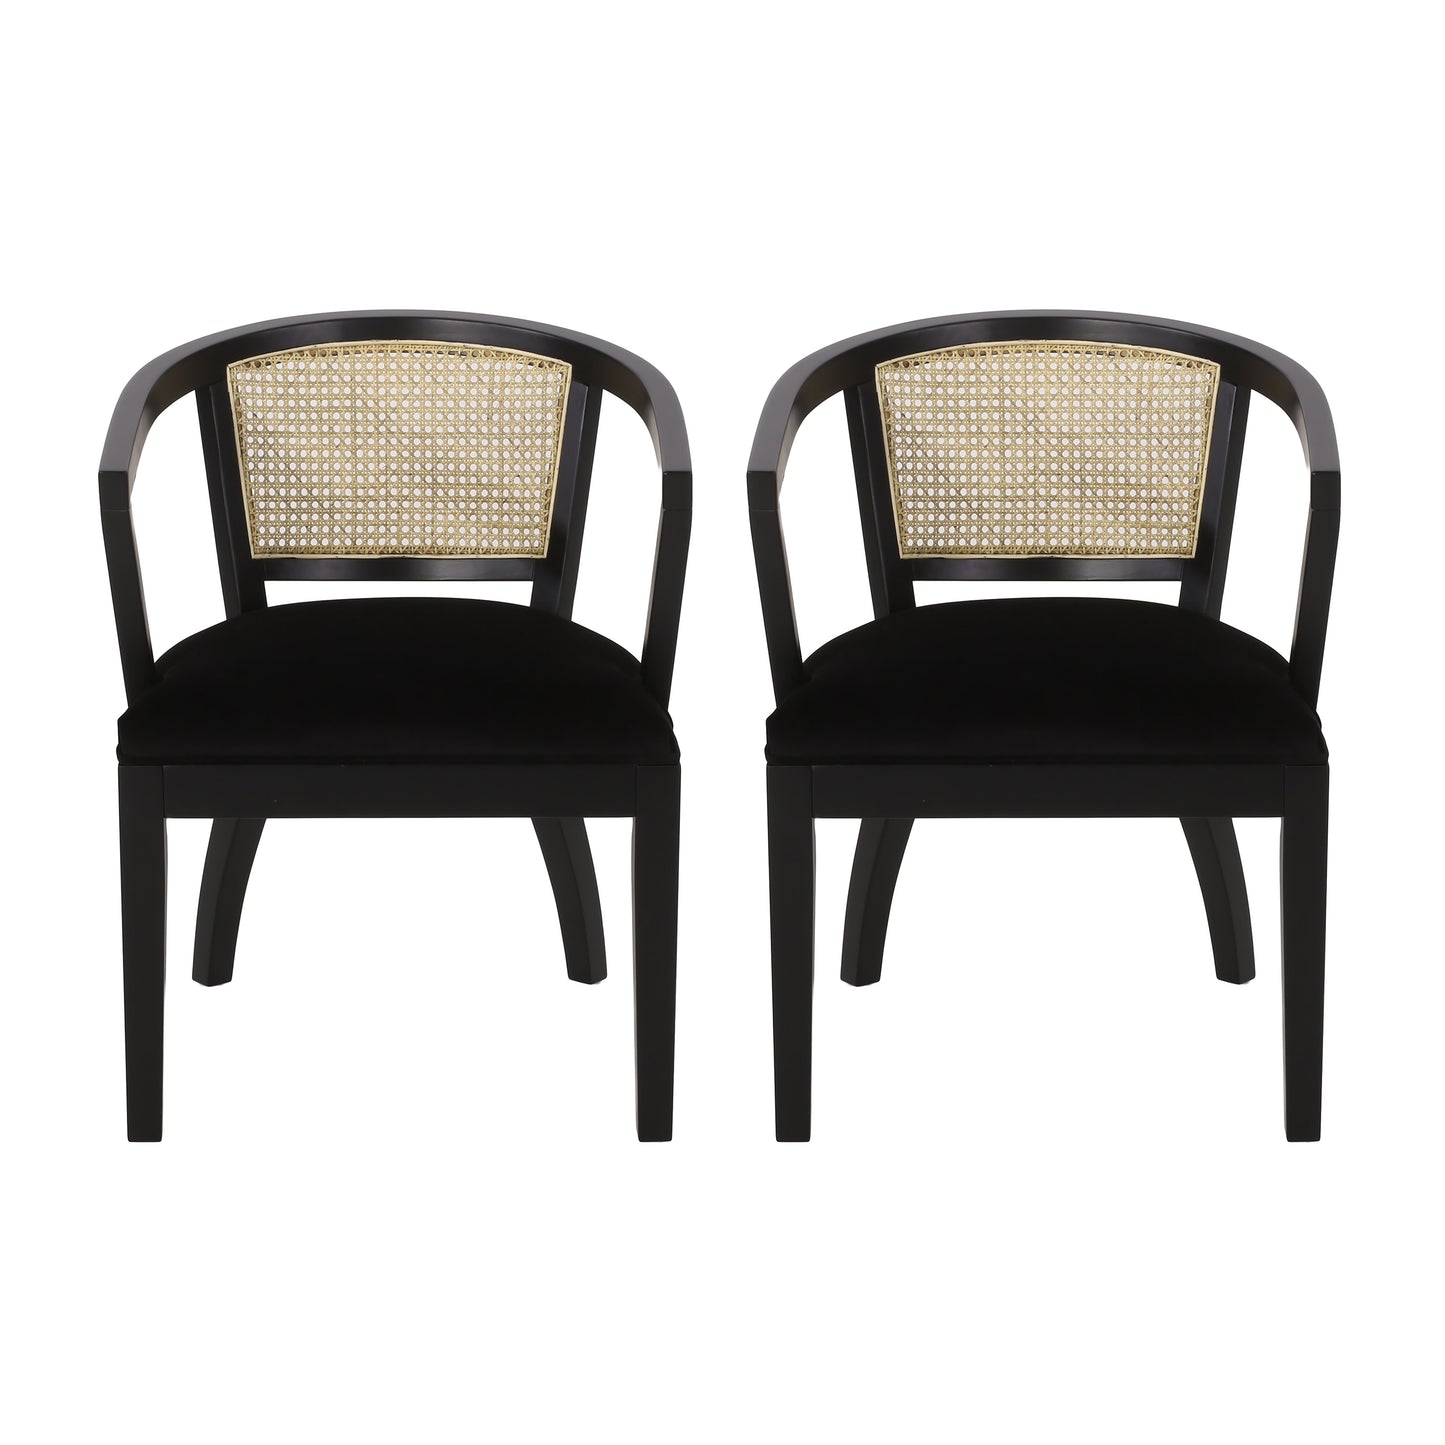 Delwood Traditional Upholstered Wood and Cane Dining Chairs, Set of 2